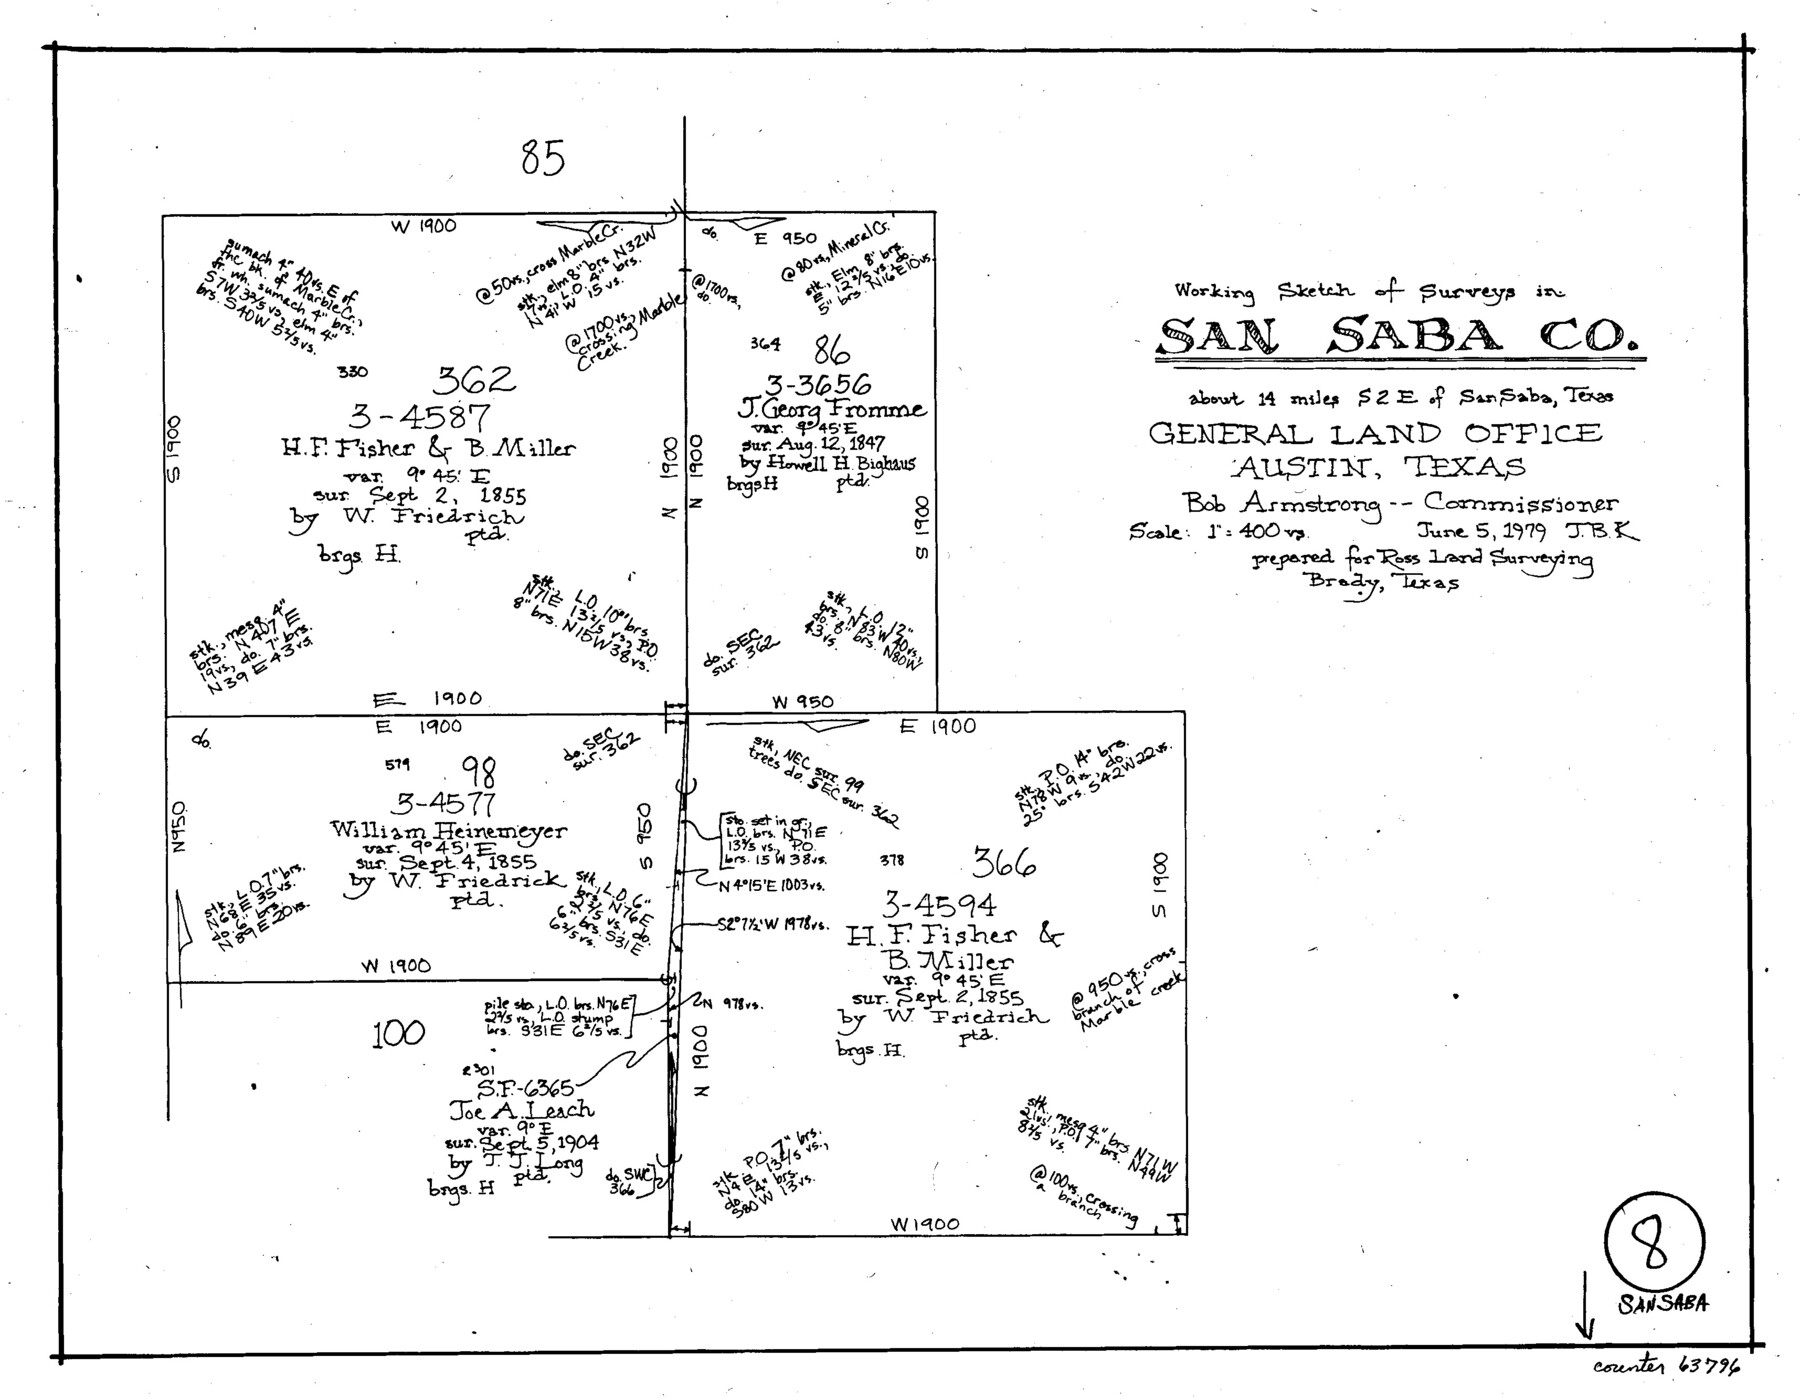 63796, San Saba County Working Sketch 8, General Map Collection